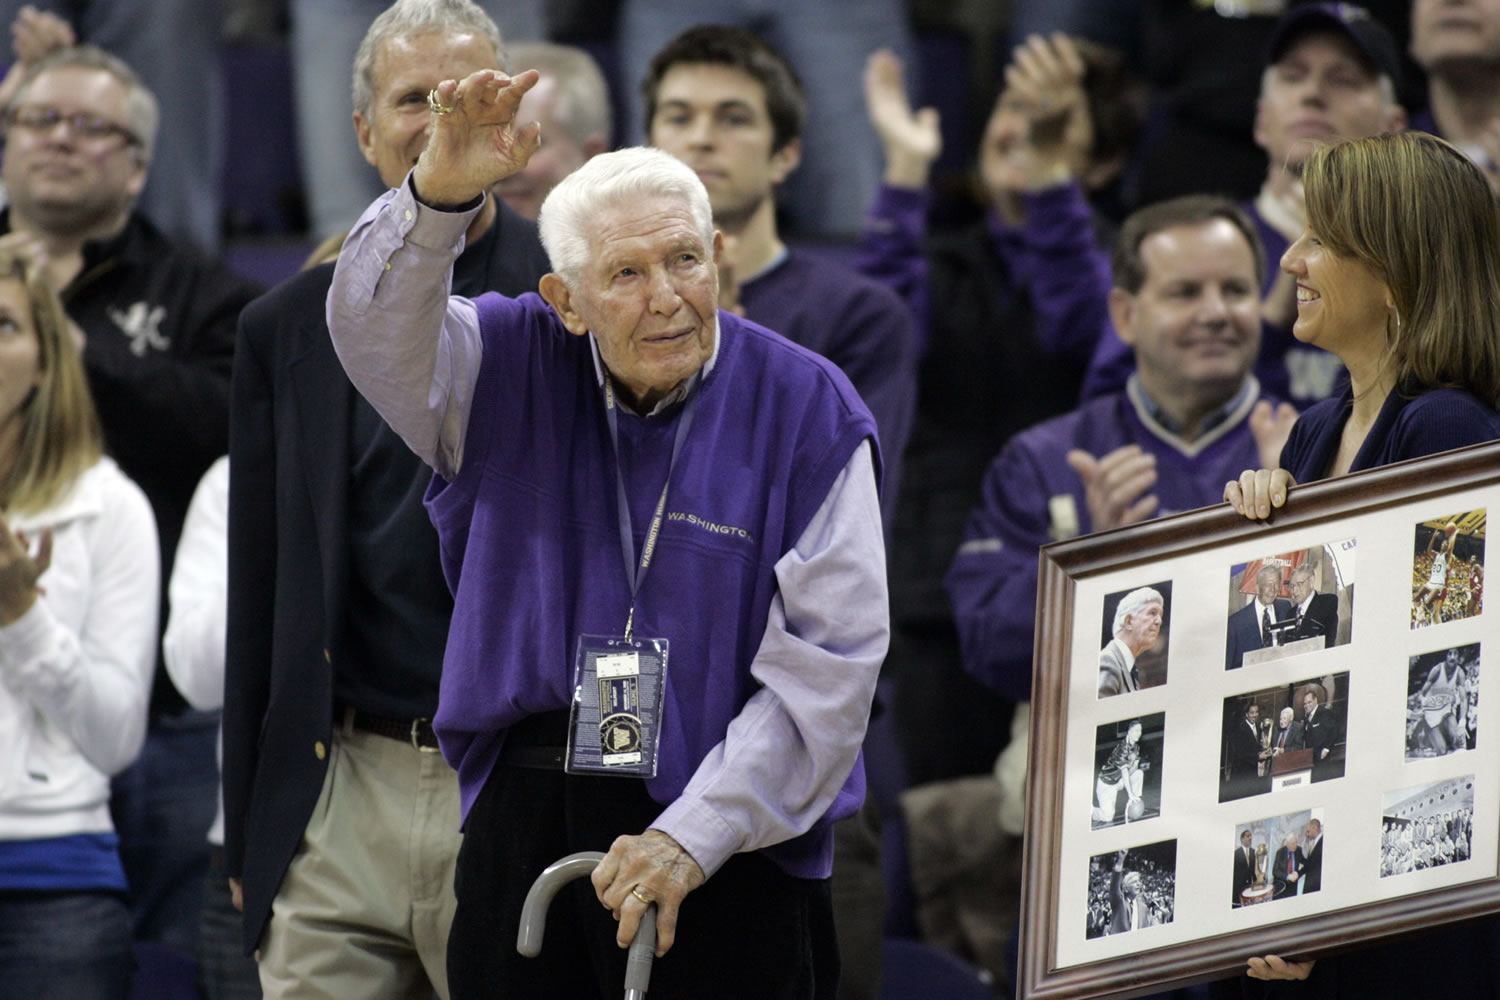 Former Washington head coach Marv Harshman acknowledges the crowd during a halftime ceremony in his honor on Nov. 14, 2009, at Hec Edmundson Pavilion in Seattle. Harshman, who spent 40 years coaching in the state of Washington, did Friday, April 12, 2013, the University of Washington said.